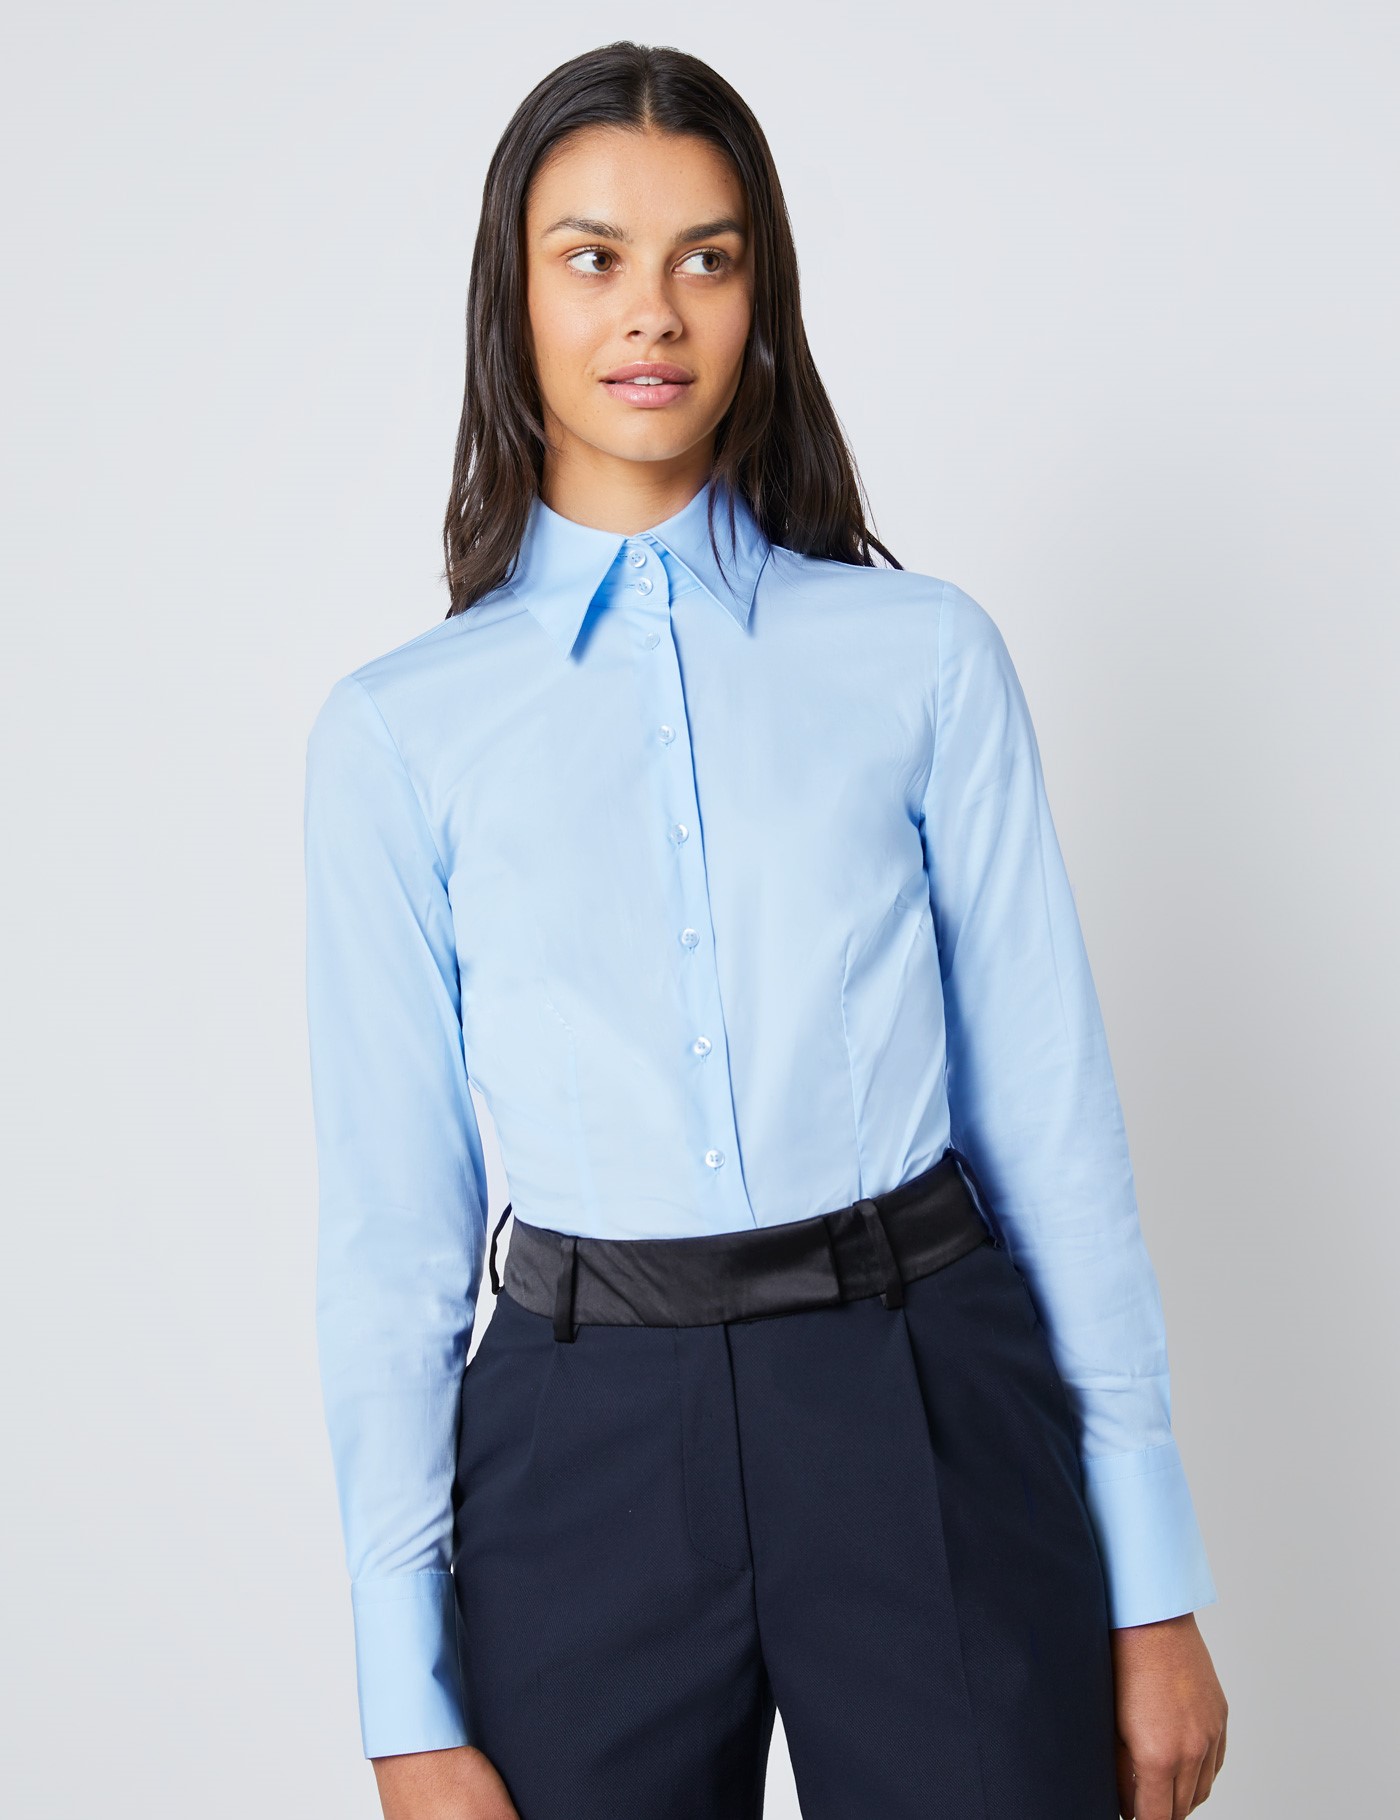 Women's Ice Blue Fitted Shirt with High Long Collar - Single Cuffs